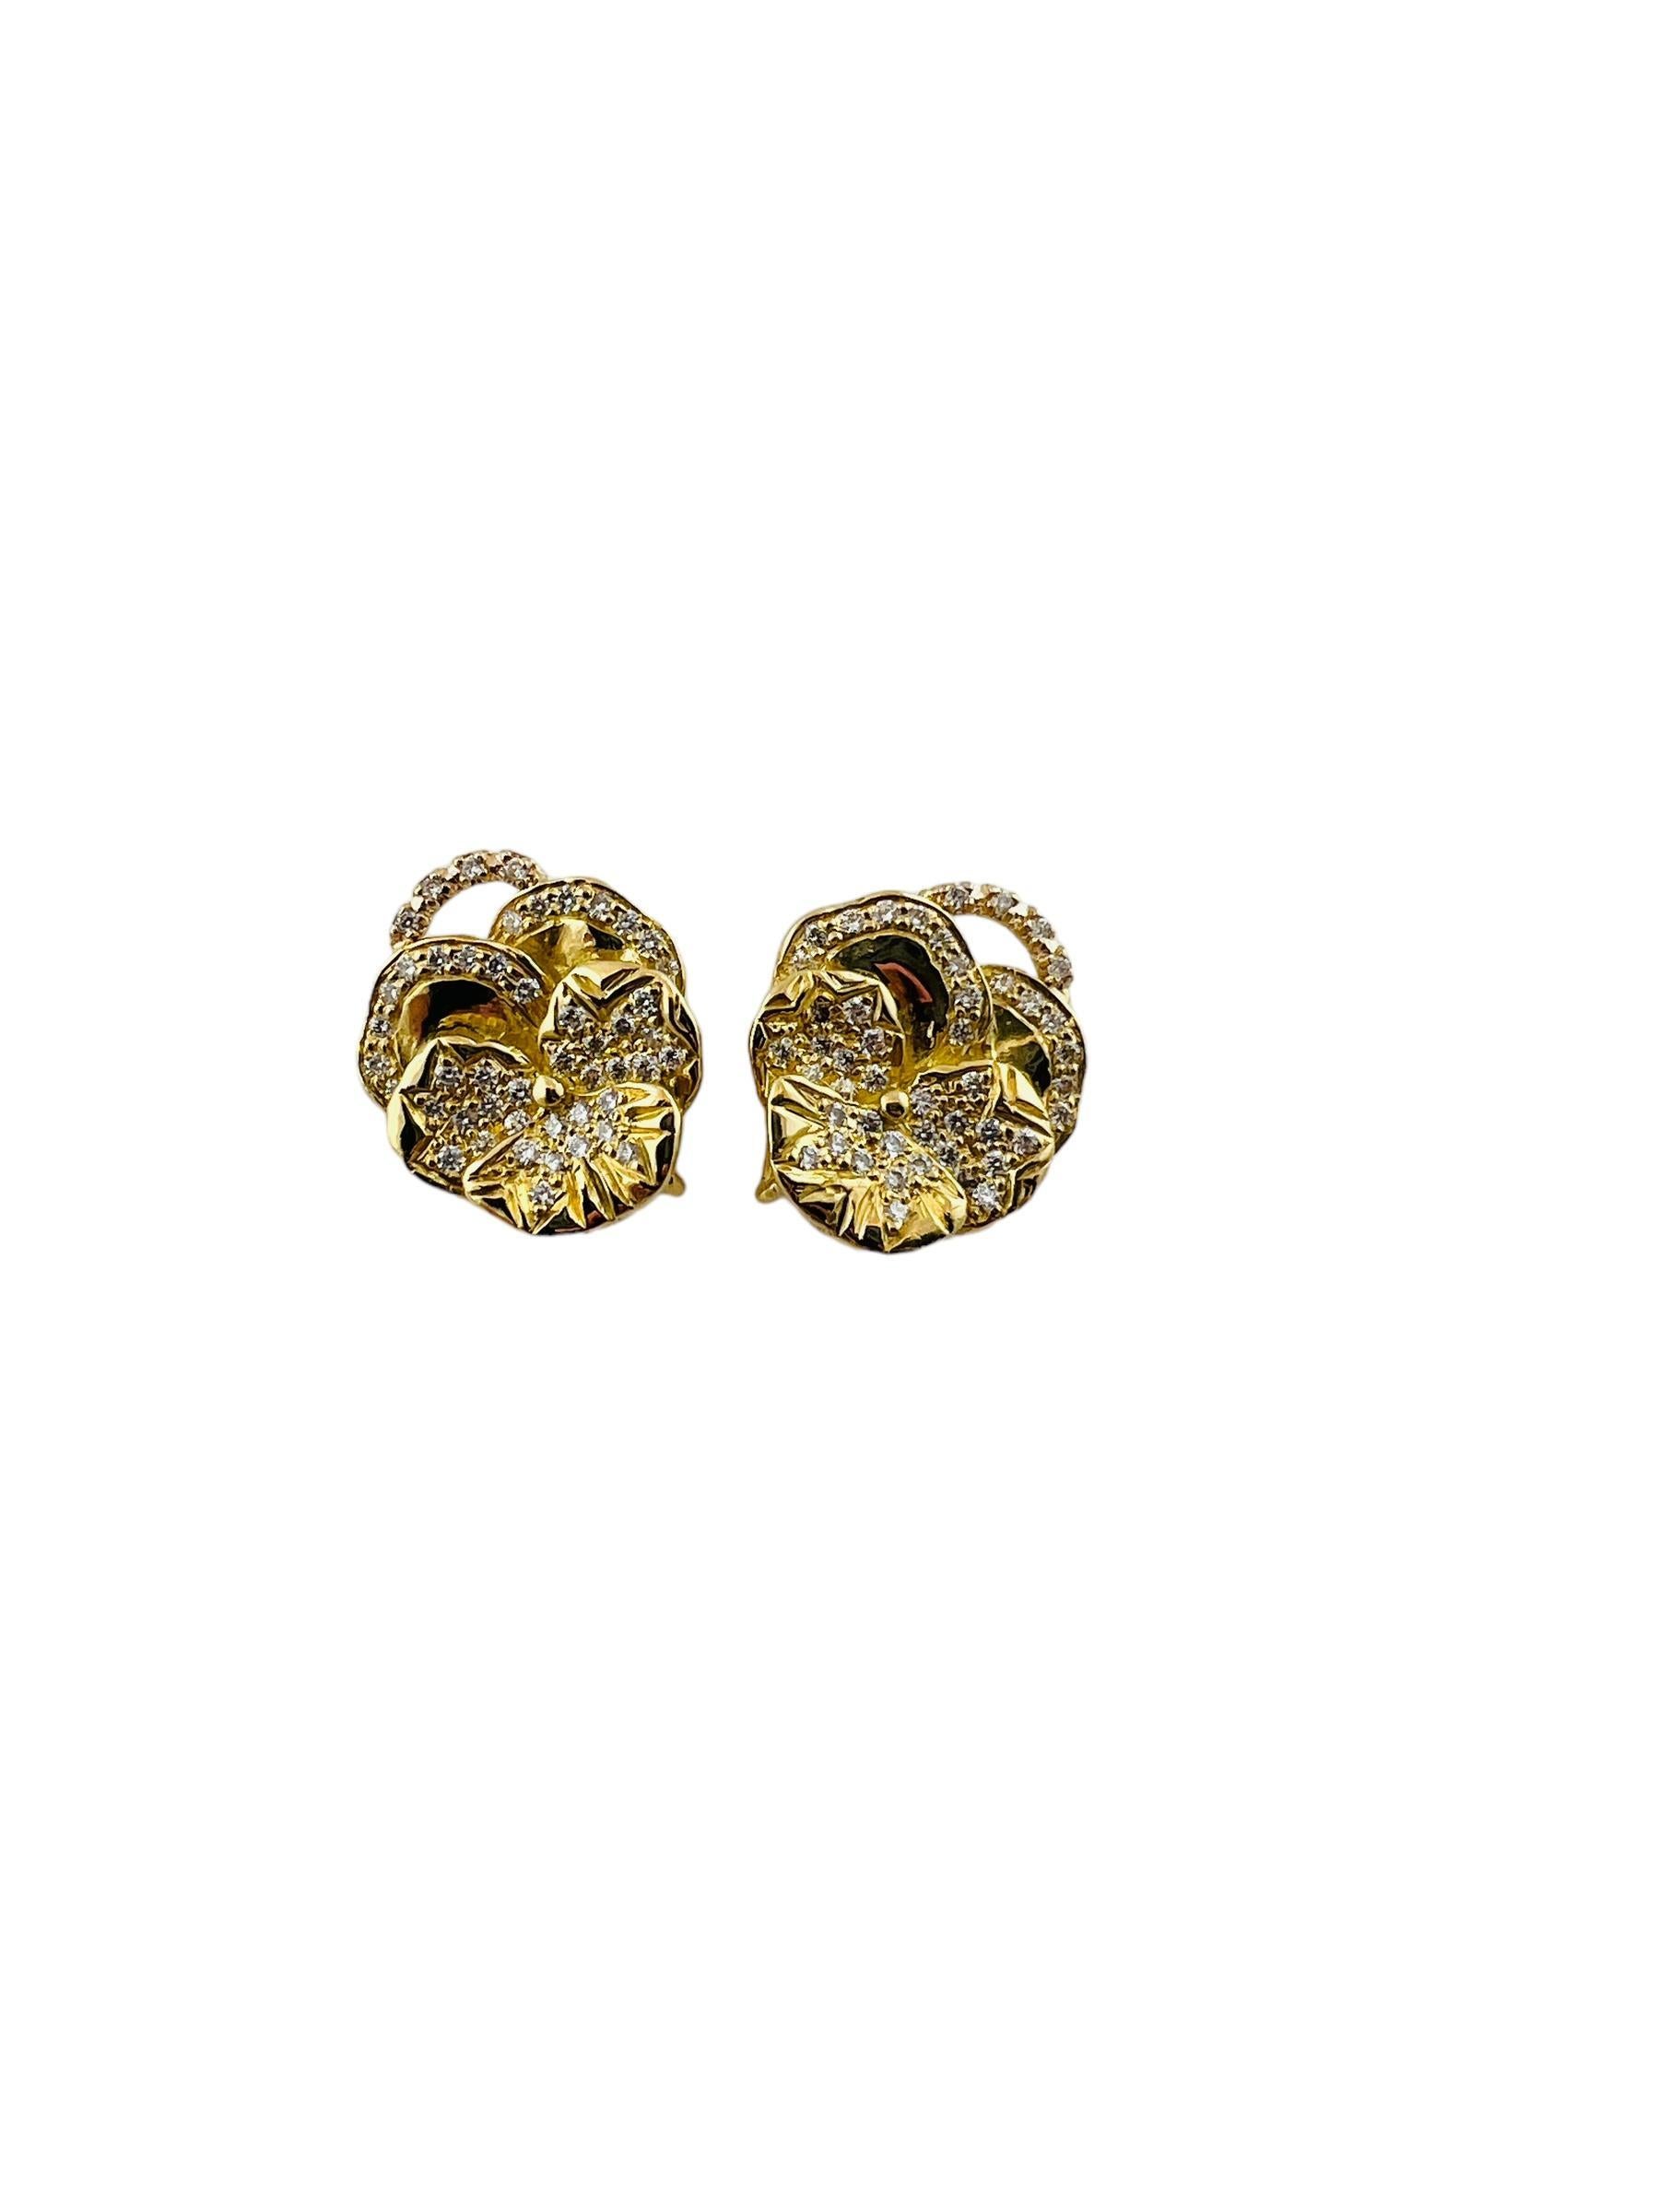 Round Cut Mish NY 18K Yellow Gold Diamond Pansy Flower Earring Enhancers #15422 For Sale